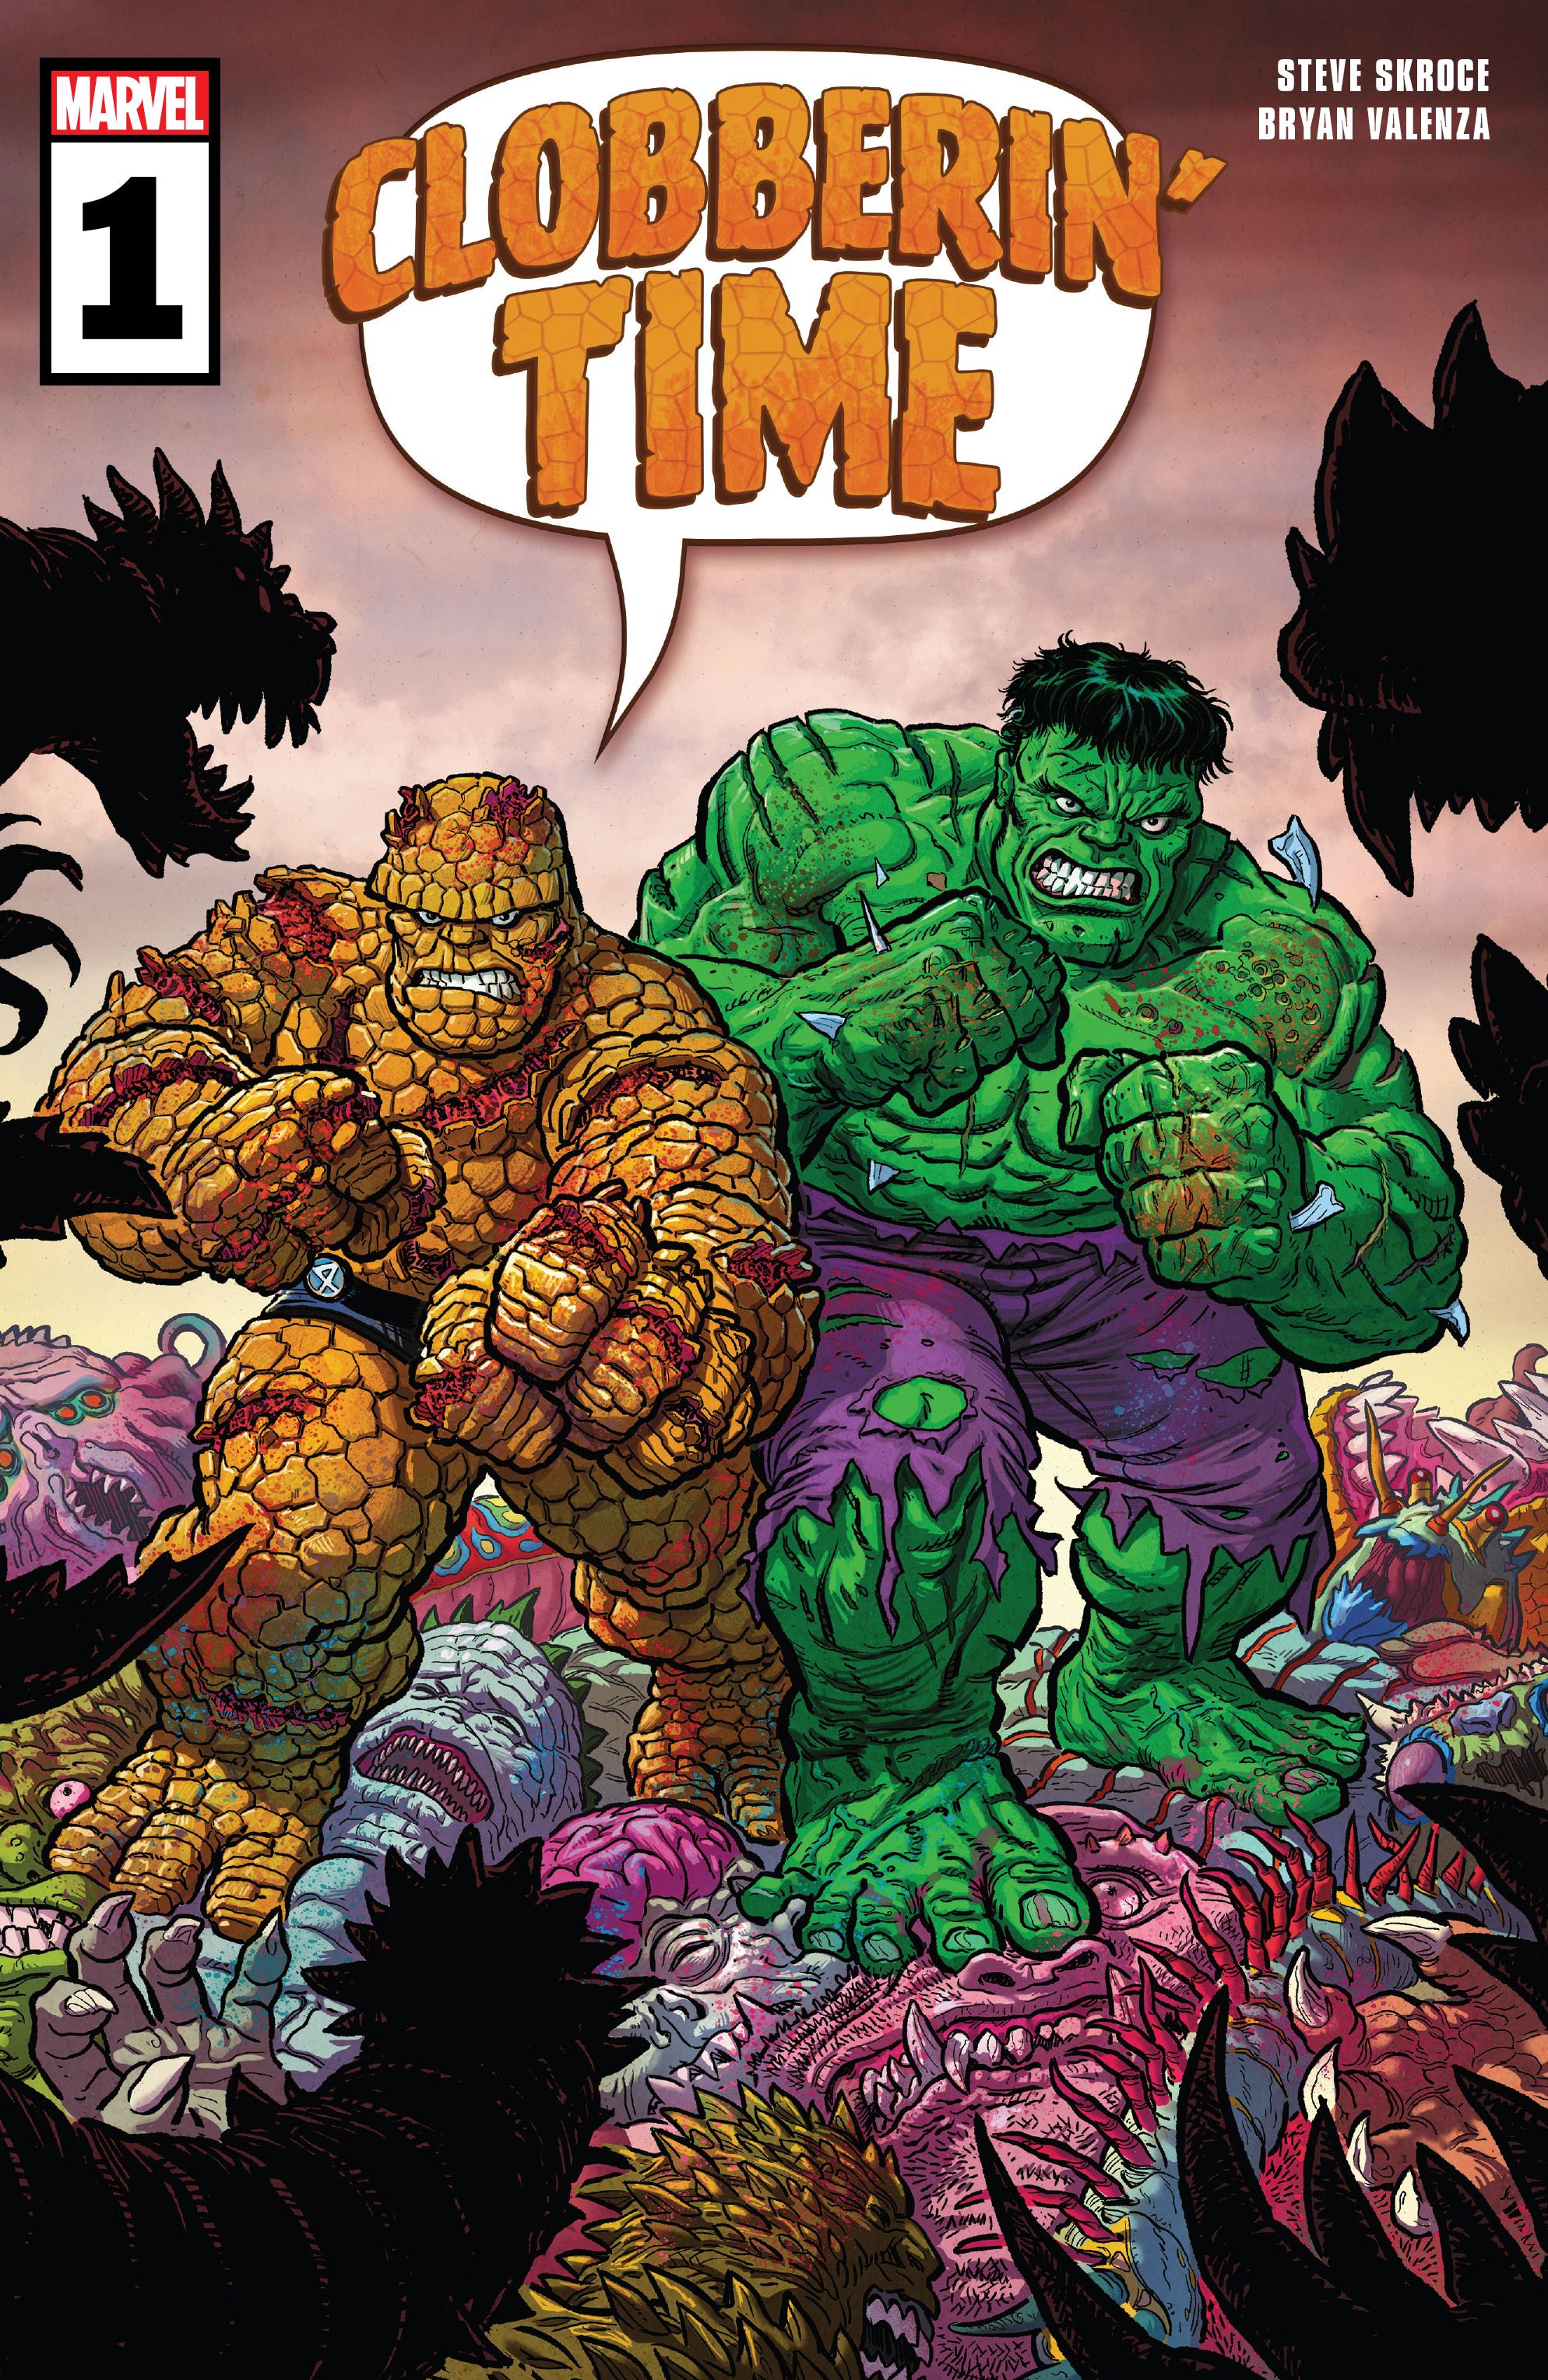 Cover of Clobberin' Time #1 with Hulk and The Thing